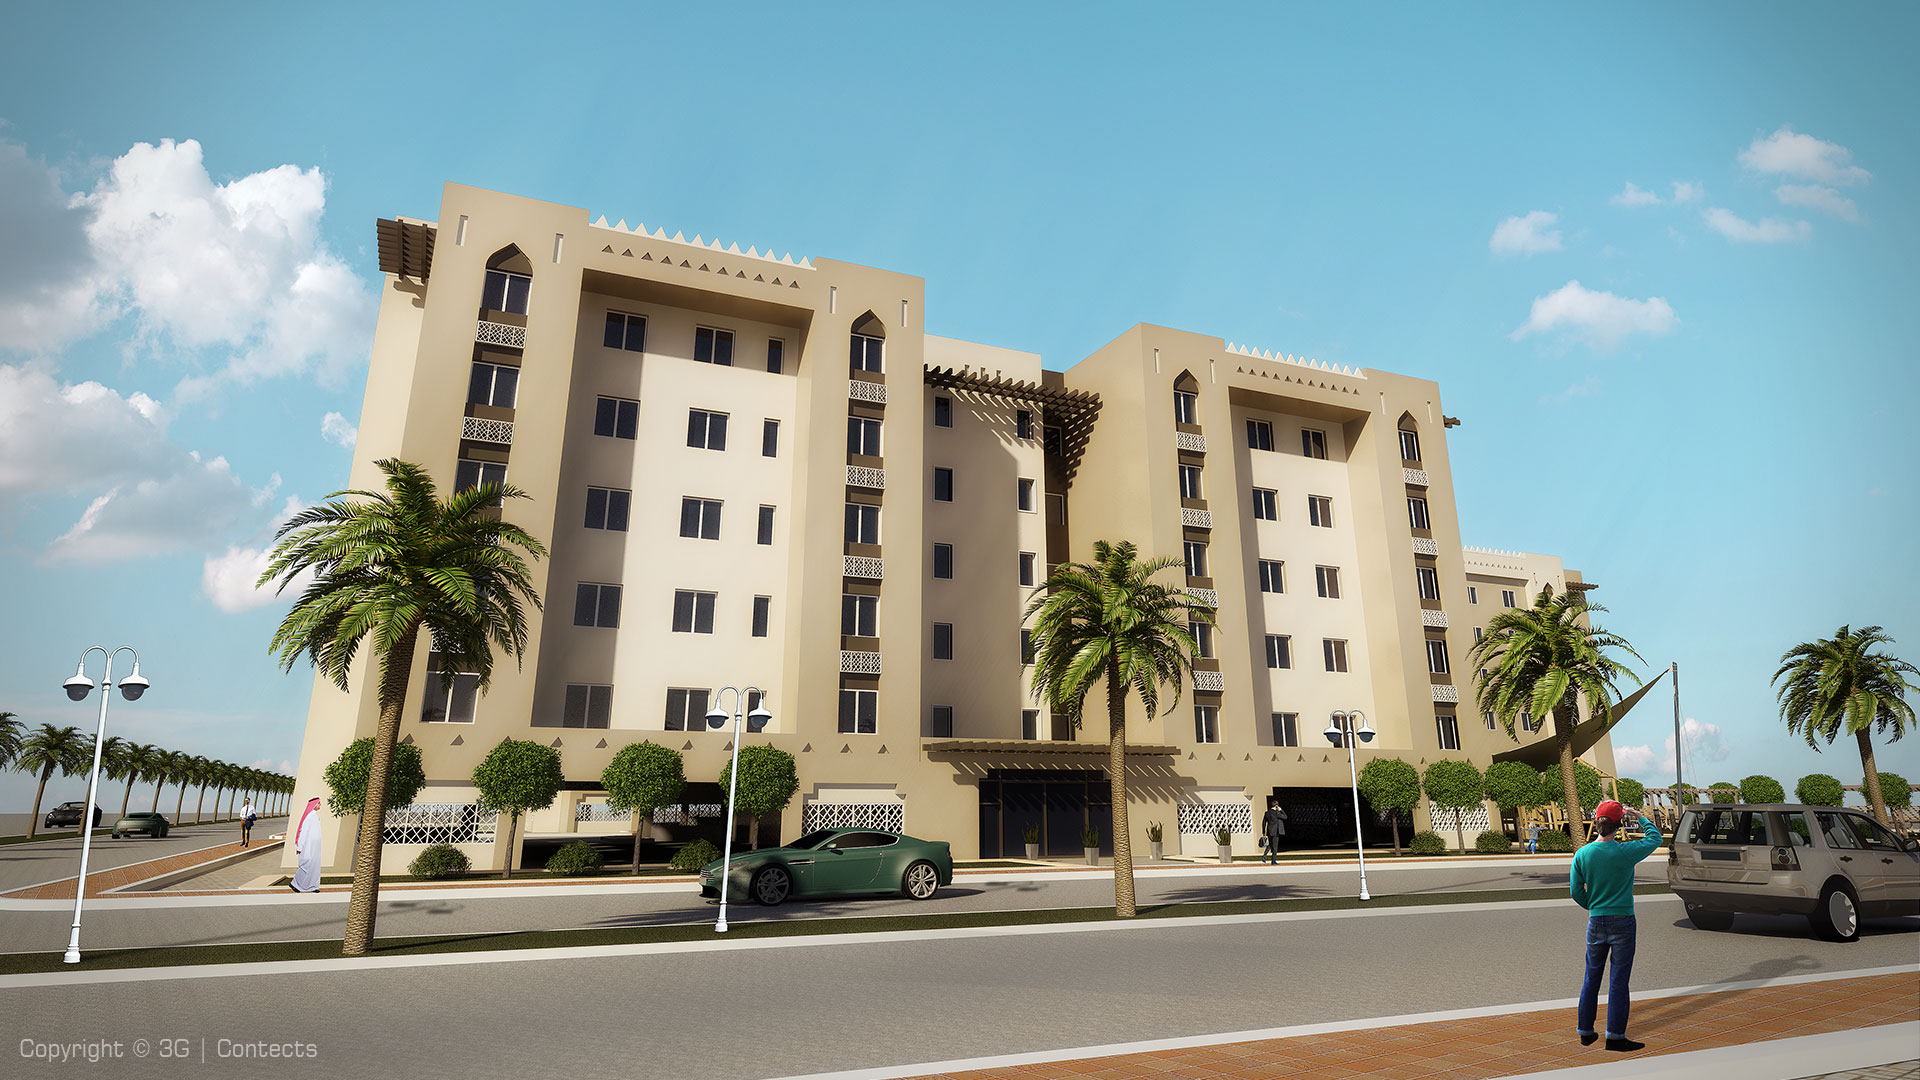 Madinah SAPL Infrastructure and Residential Project